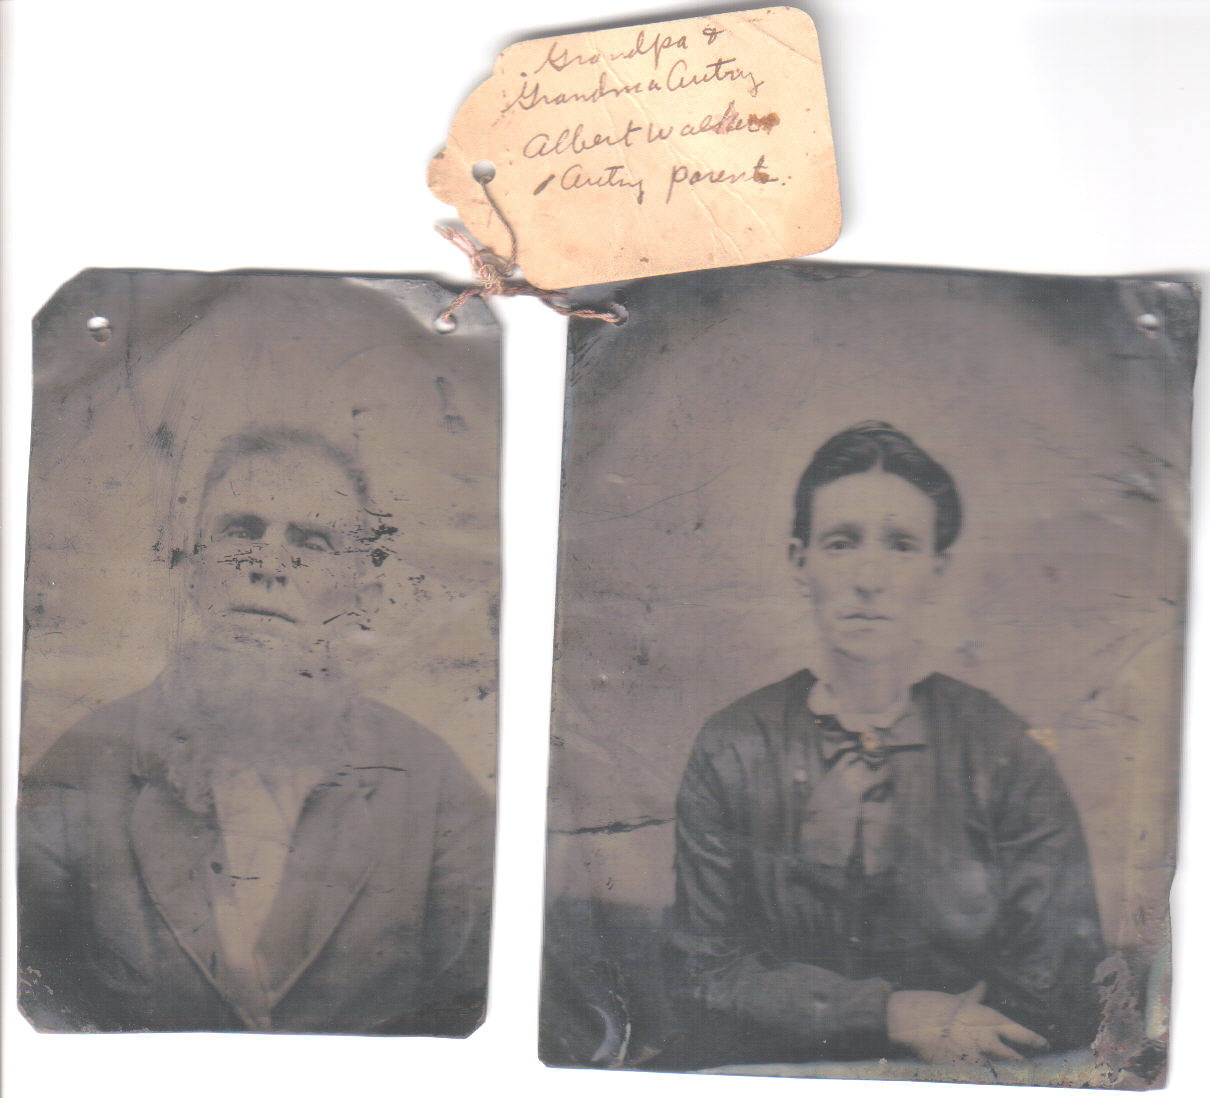 James and Rebecca Autry